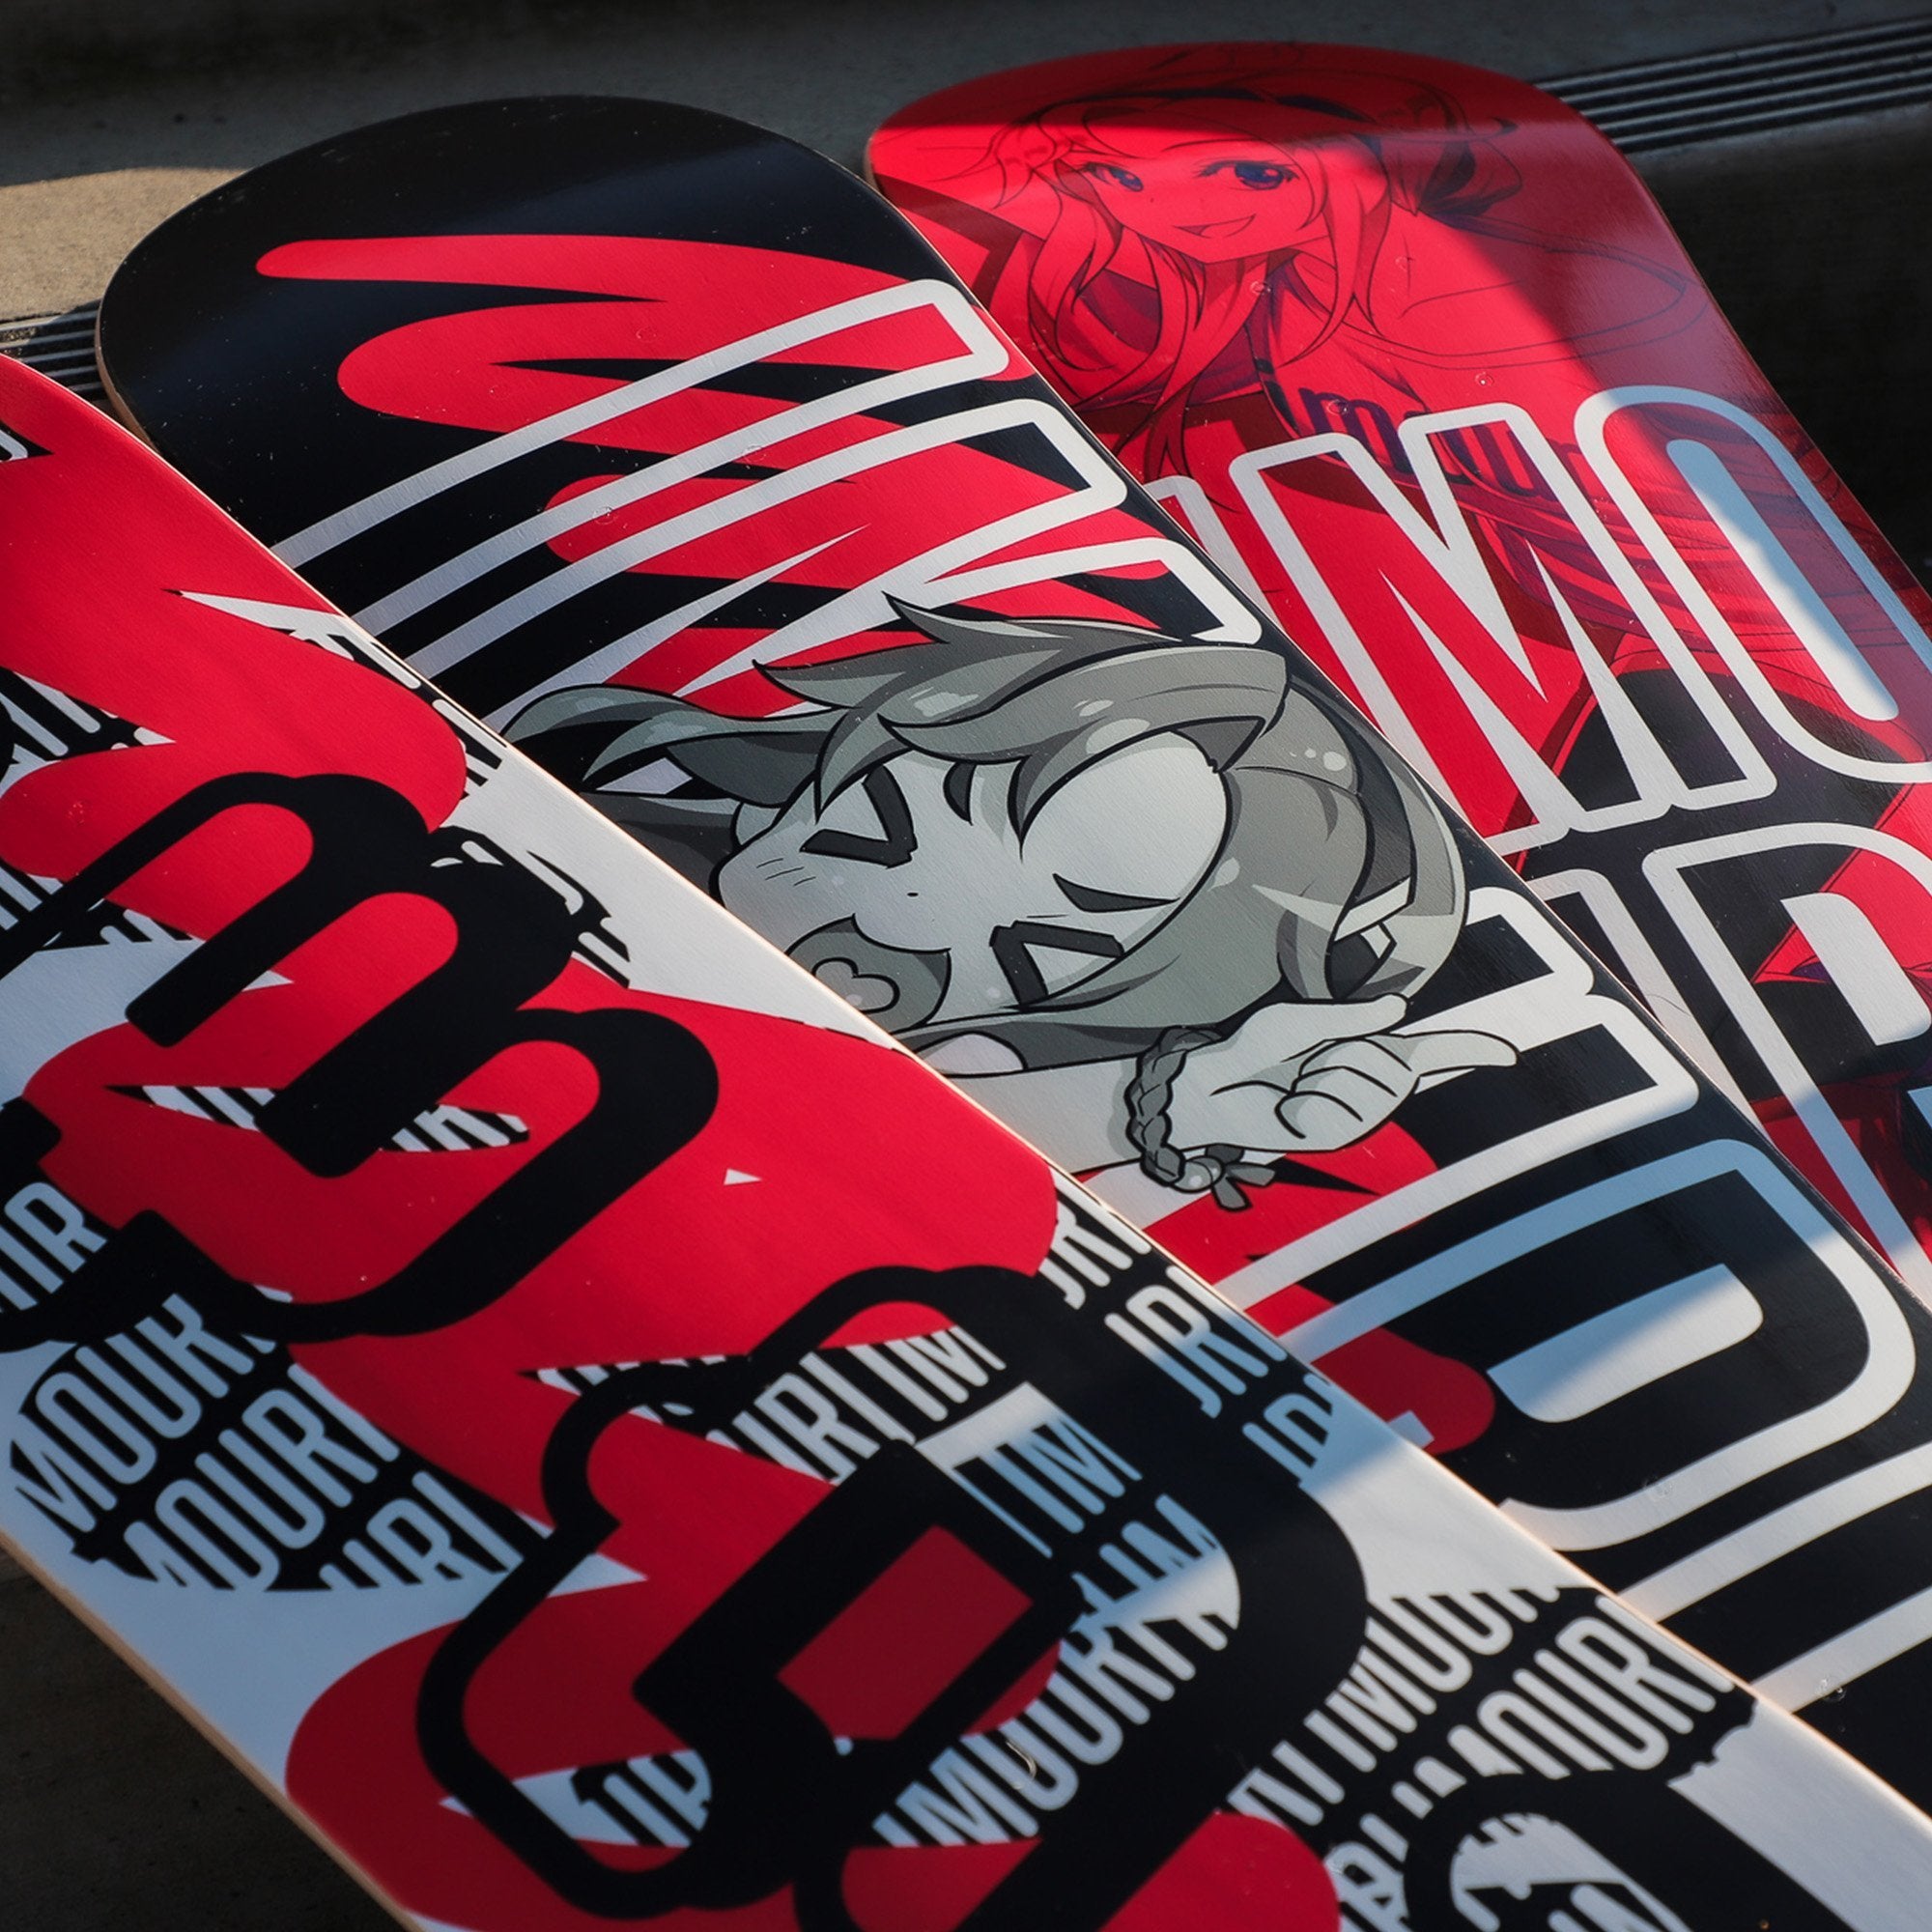 Imouri Skateboards & Special Charity Drop